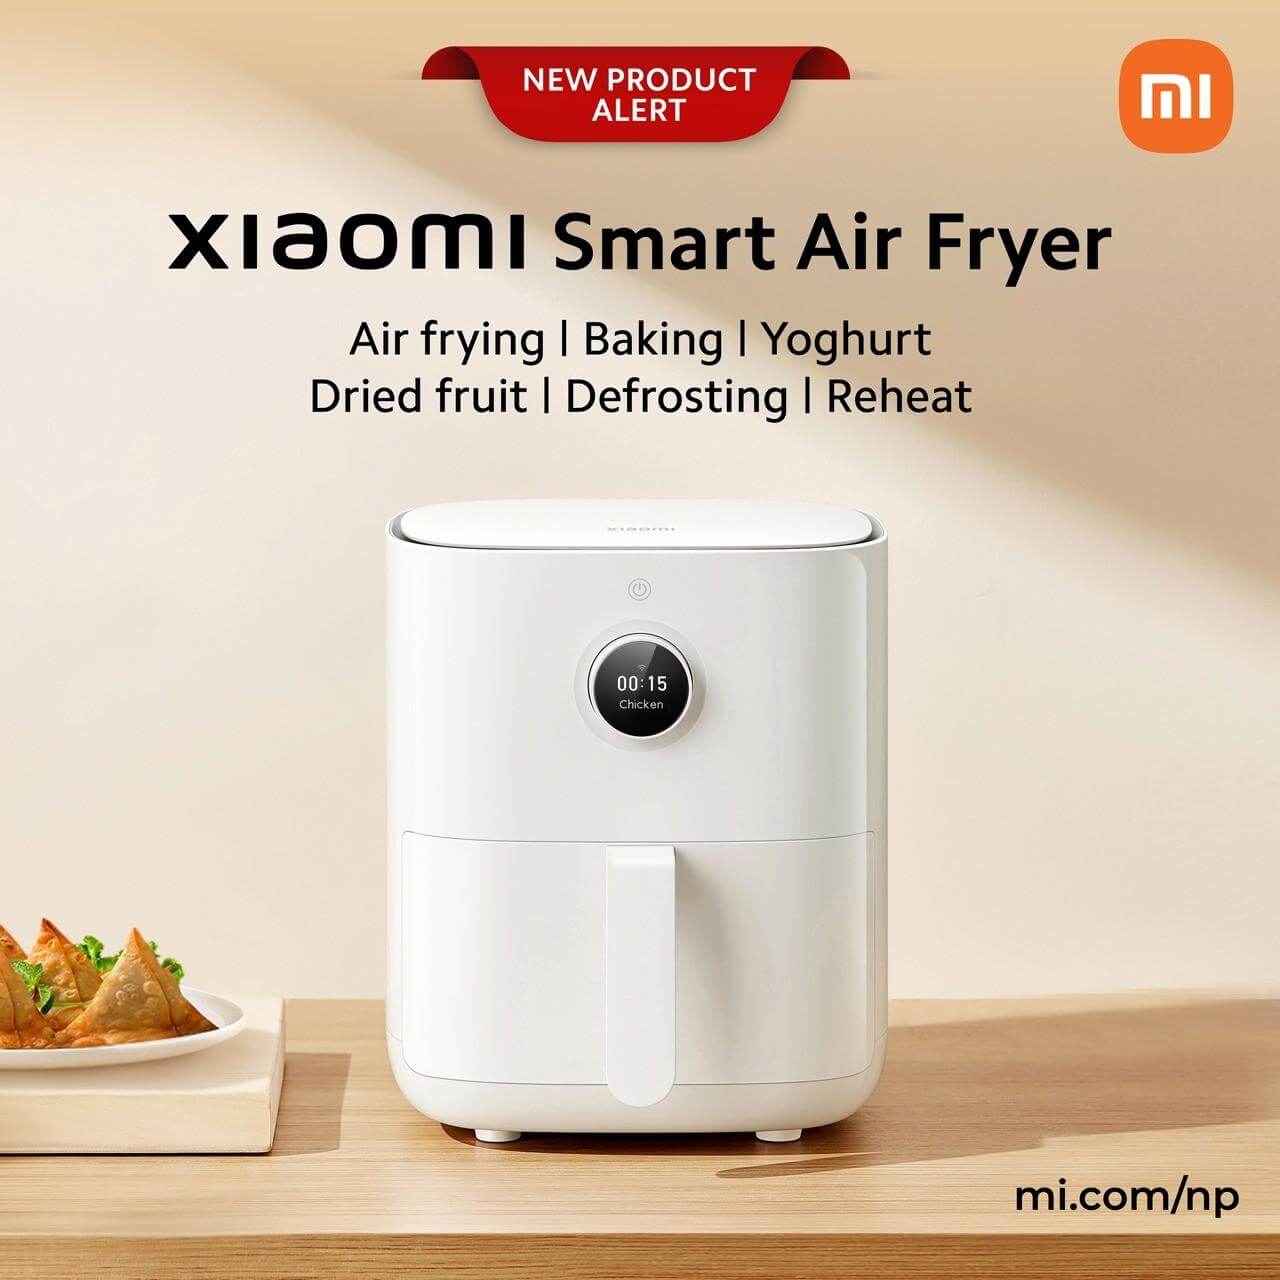 Xiaomi Smart Air Fryer with Google Assistant launched in India